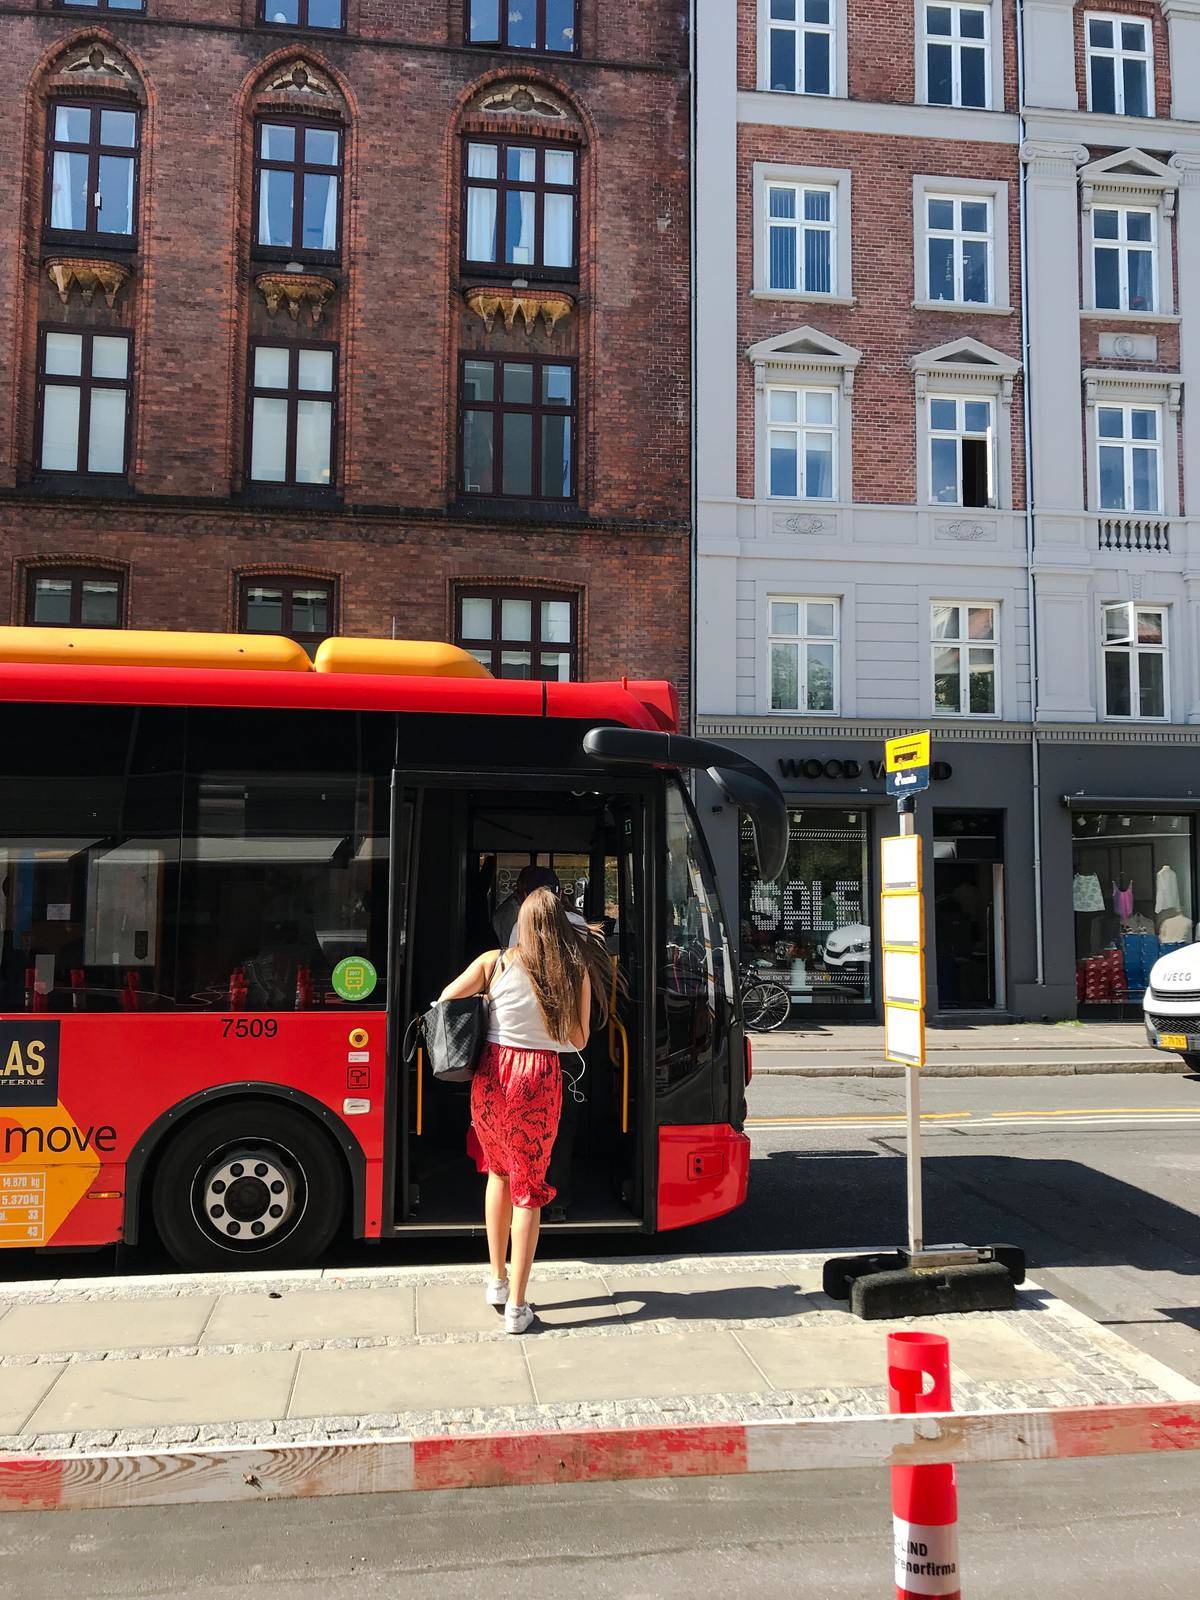 <p>To help ensure a steady flow of passengers, people should remember that when they walk onto a bus, it is best to move to the back. </p> <p>This way, people won't take up time getting situated in the front, making people wait either on the street or behind them to find a seat of their own.</p>